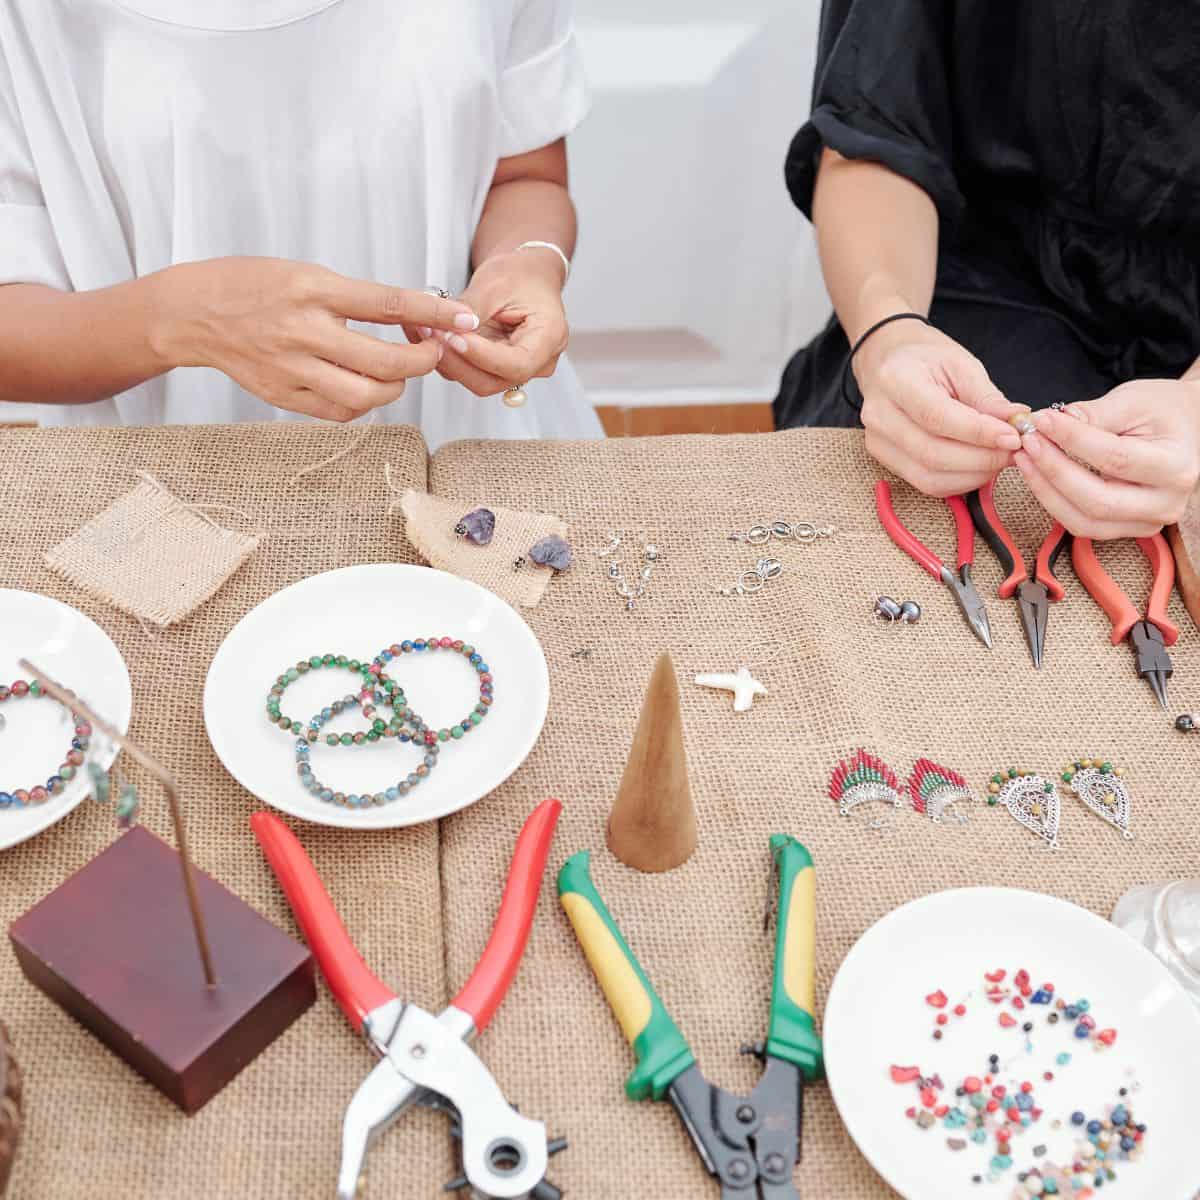 Women making jewelry at home.